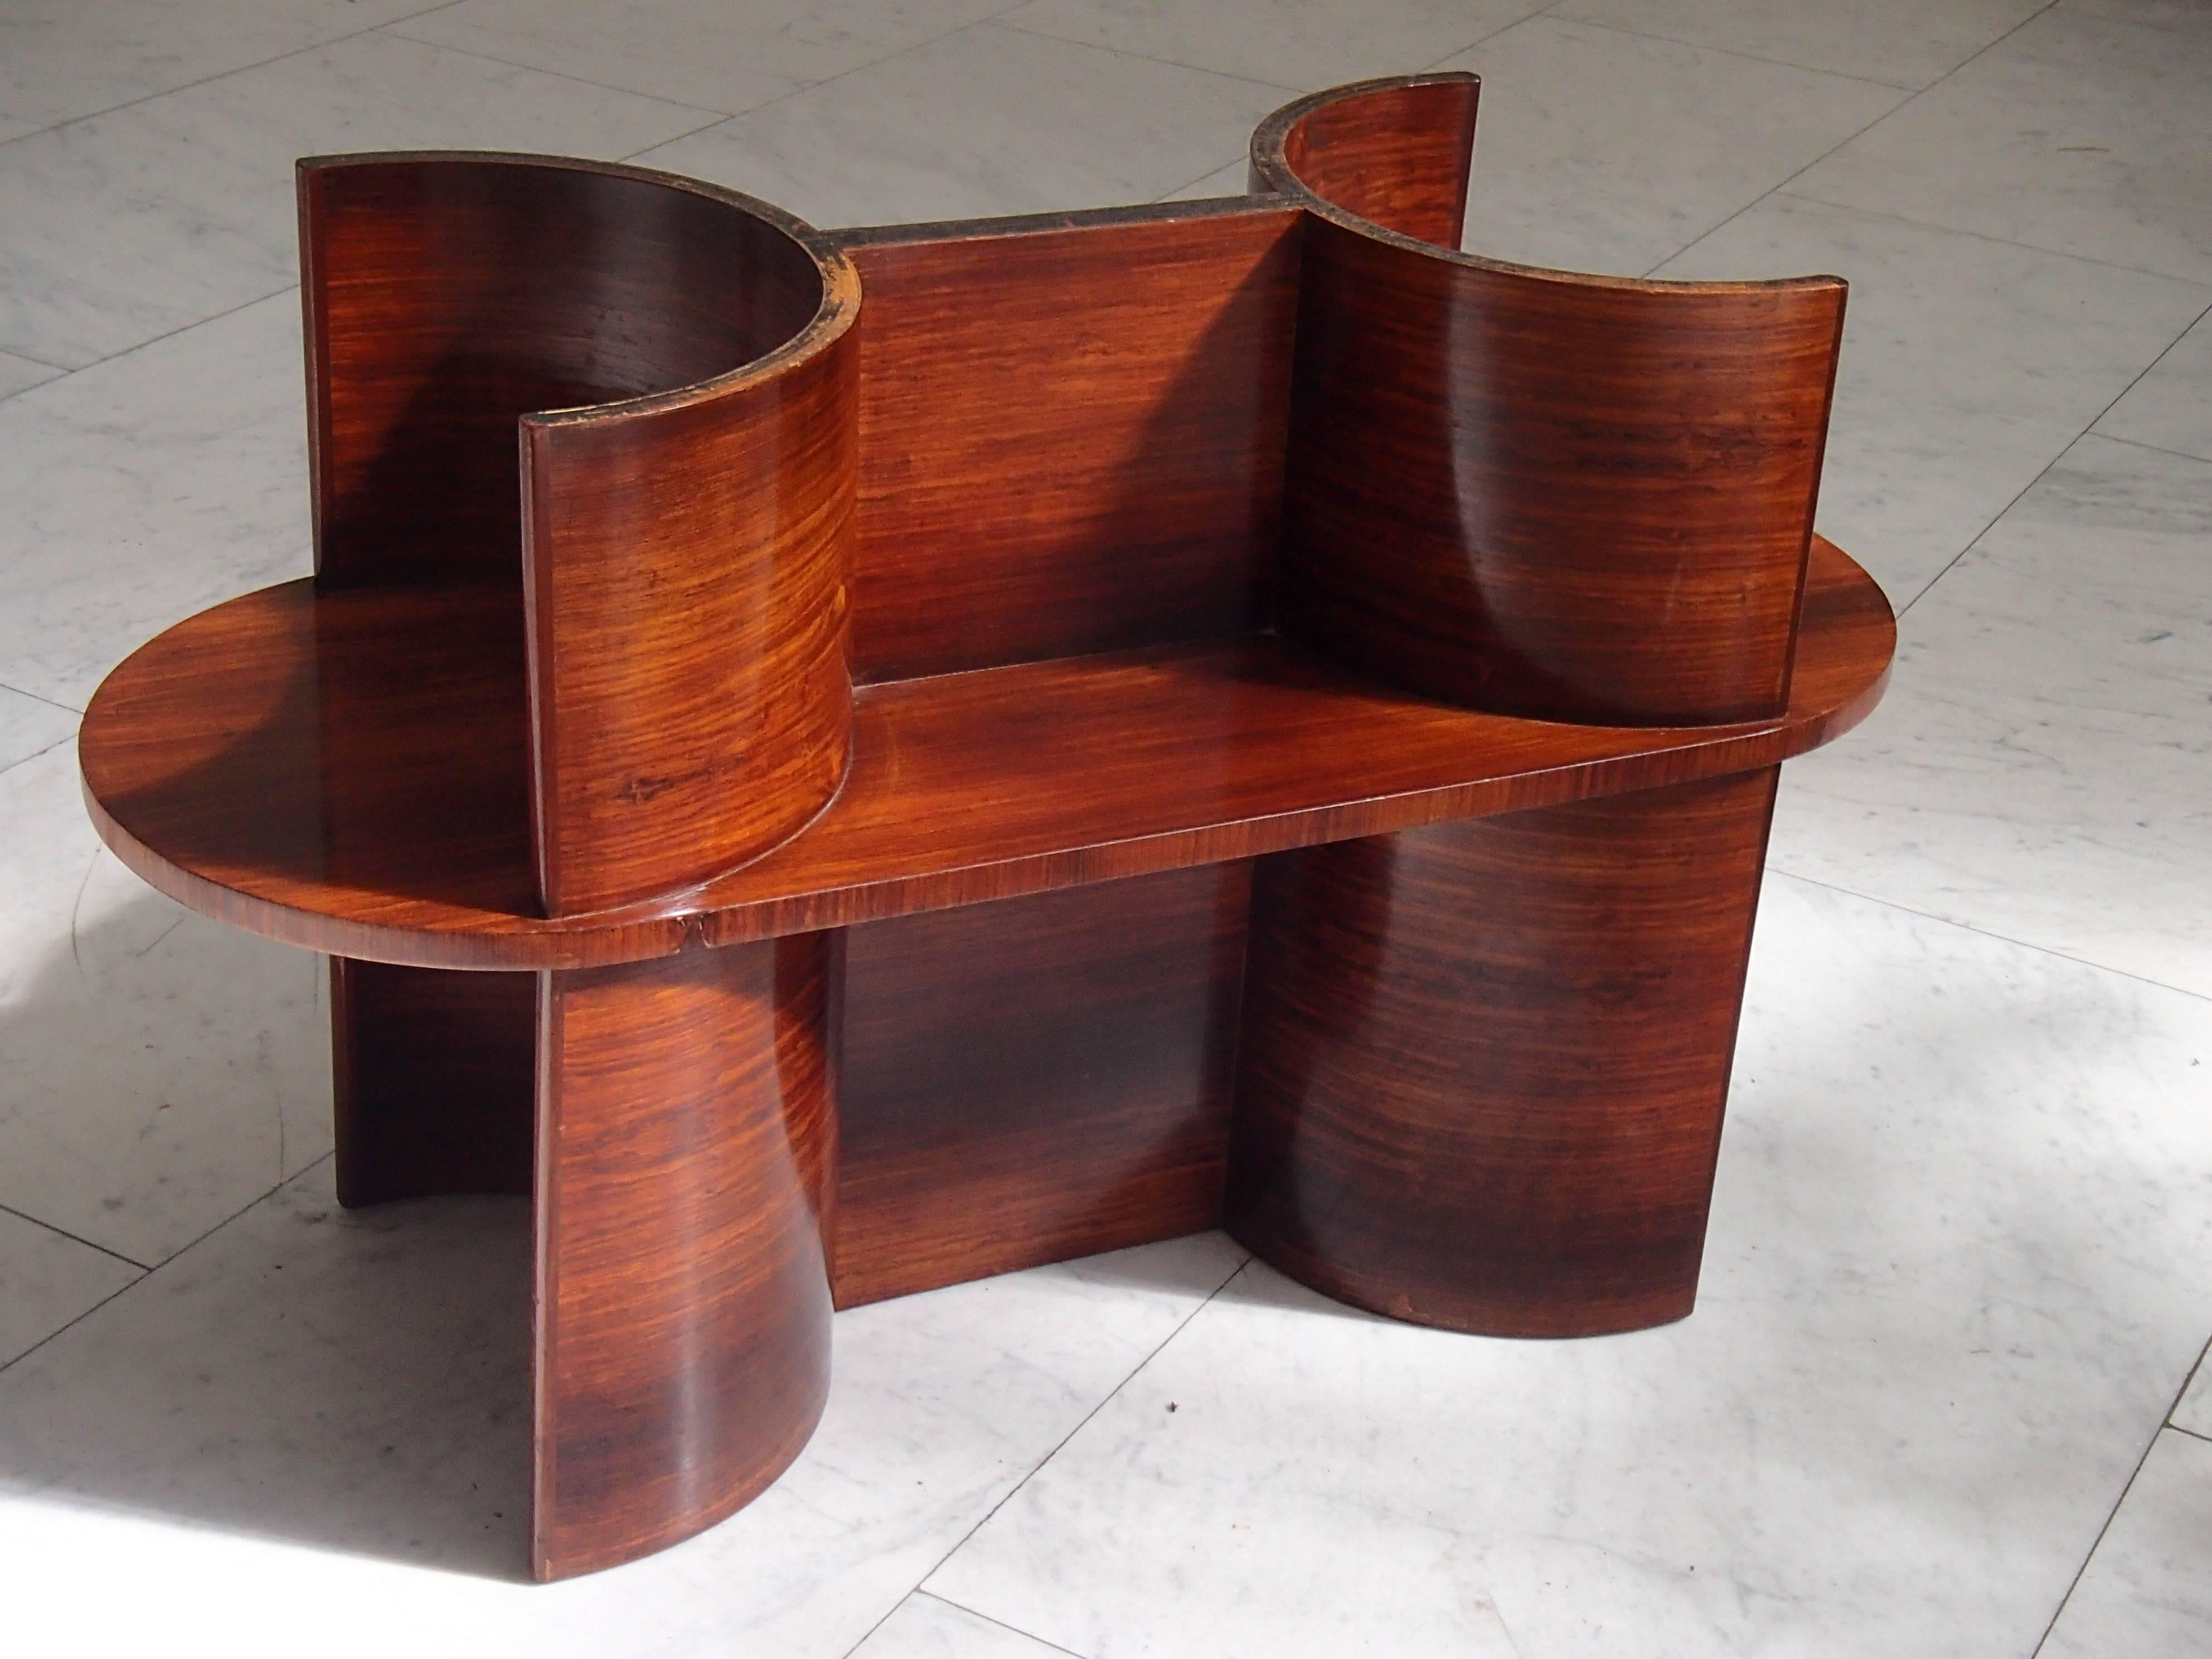 1930 cubist 1930 cubist modernistic console table rosewood and thick glass top
square with round ends.